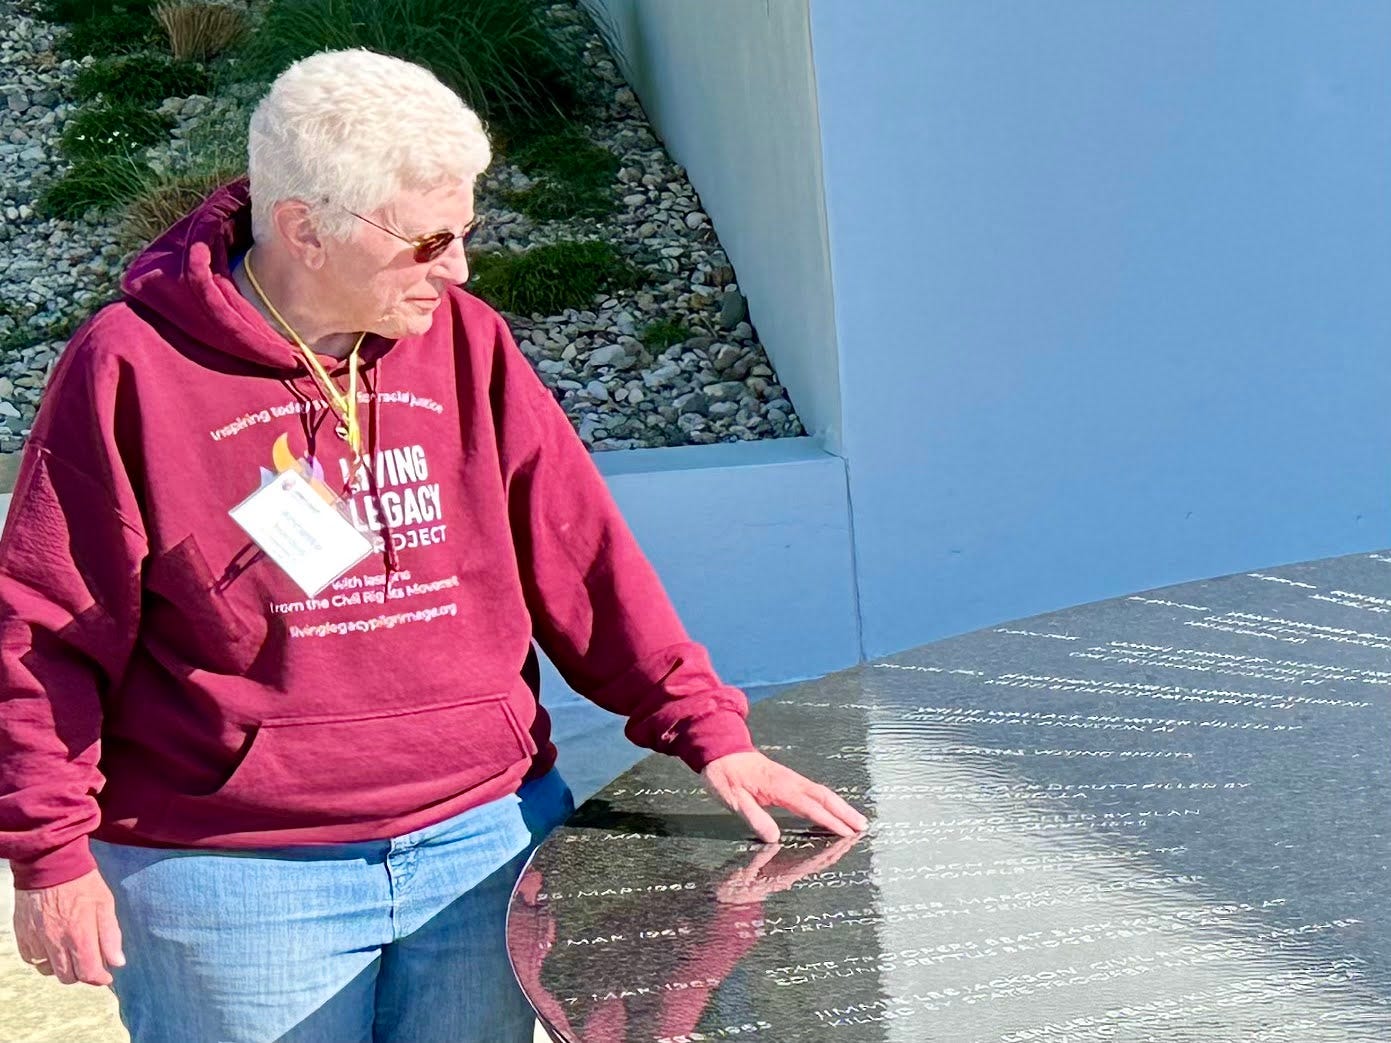 White woman with white wavy short hair and glasses, wearing a burgundy sweatshirt and blue jeans, touches a name engraved on black granite that has water on top of it